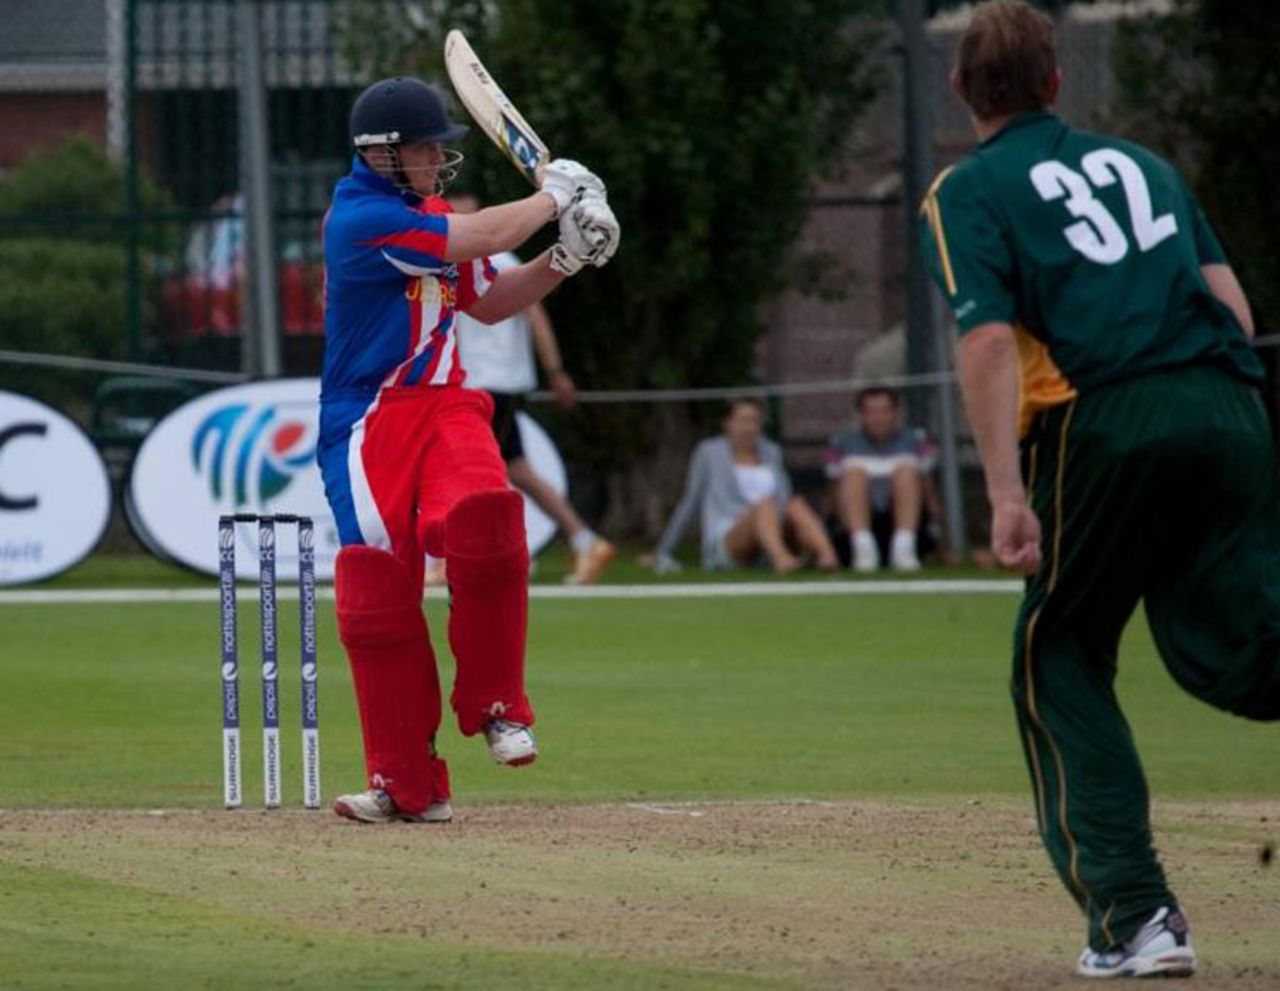 Edward Farley pulls on his way to 90 off 48 balls for Jersey, Guernsey v Jersey, third-place playoff, European Championship Division One Twenty20, St Clement, July 24, 2011